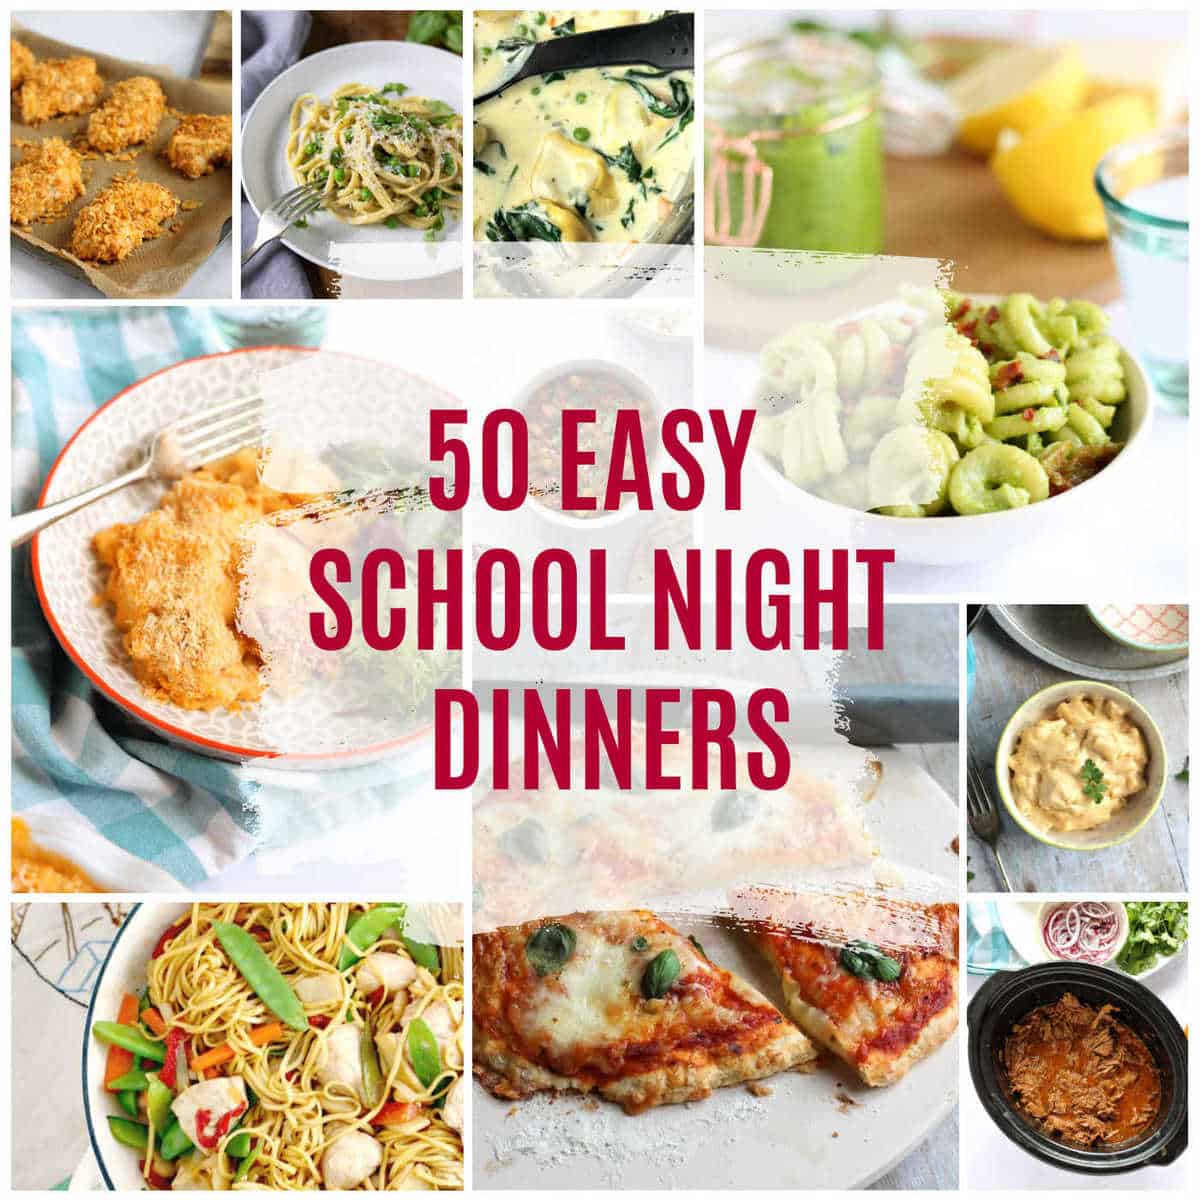 50 Easy School Night Dinners collage